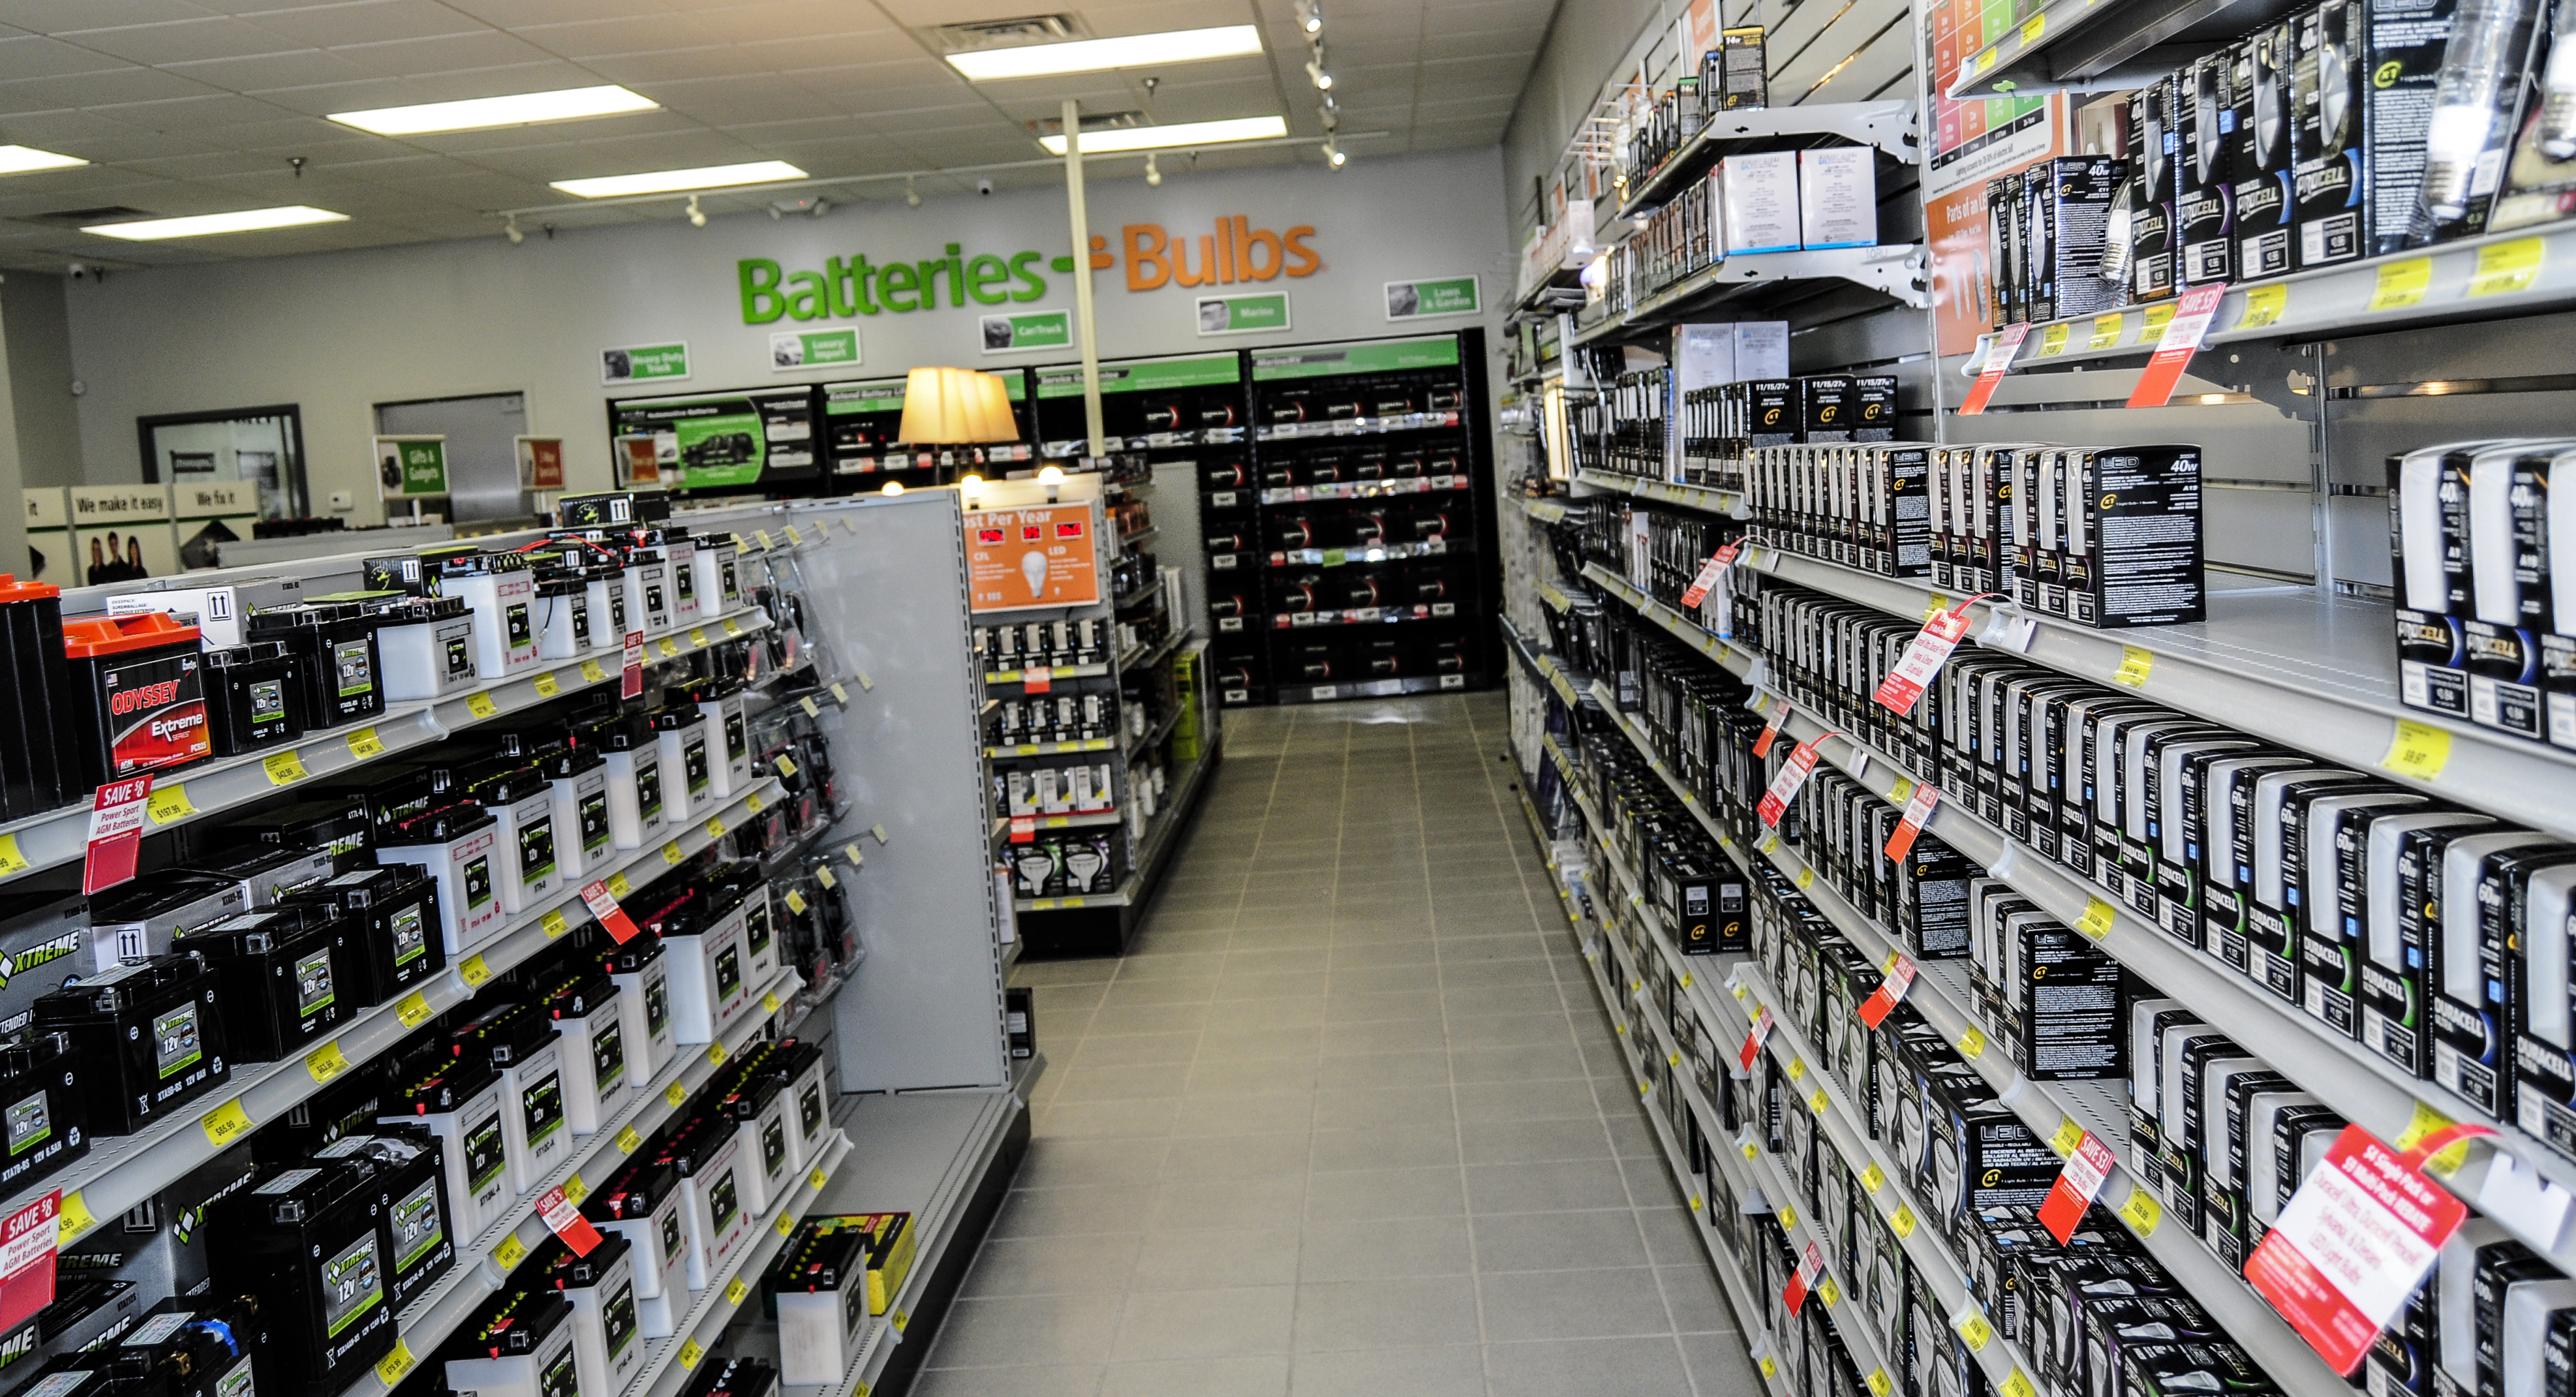 Www batteries com. Battery Store. Shuxin Battery Store. Batteries Bulbs White Black. Batteries Bulbs White Black picture.